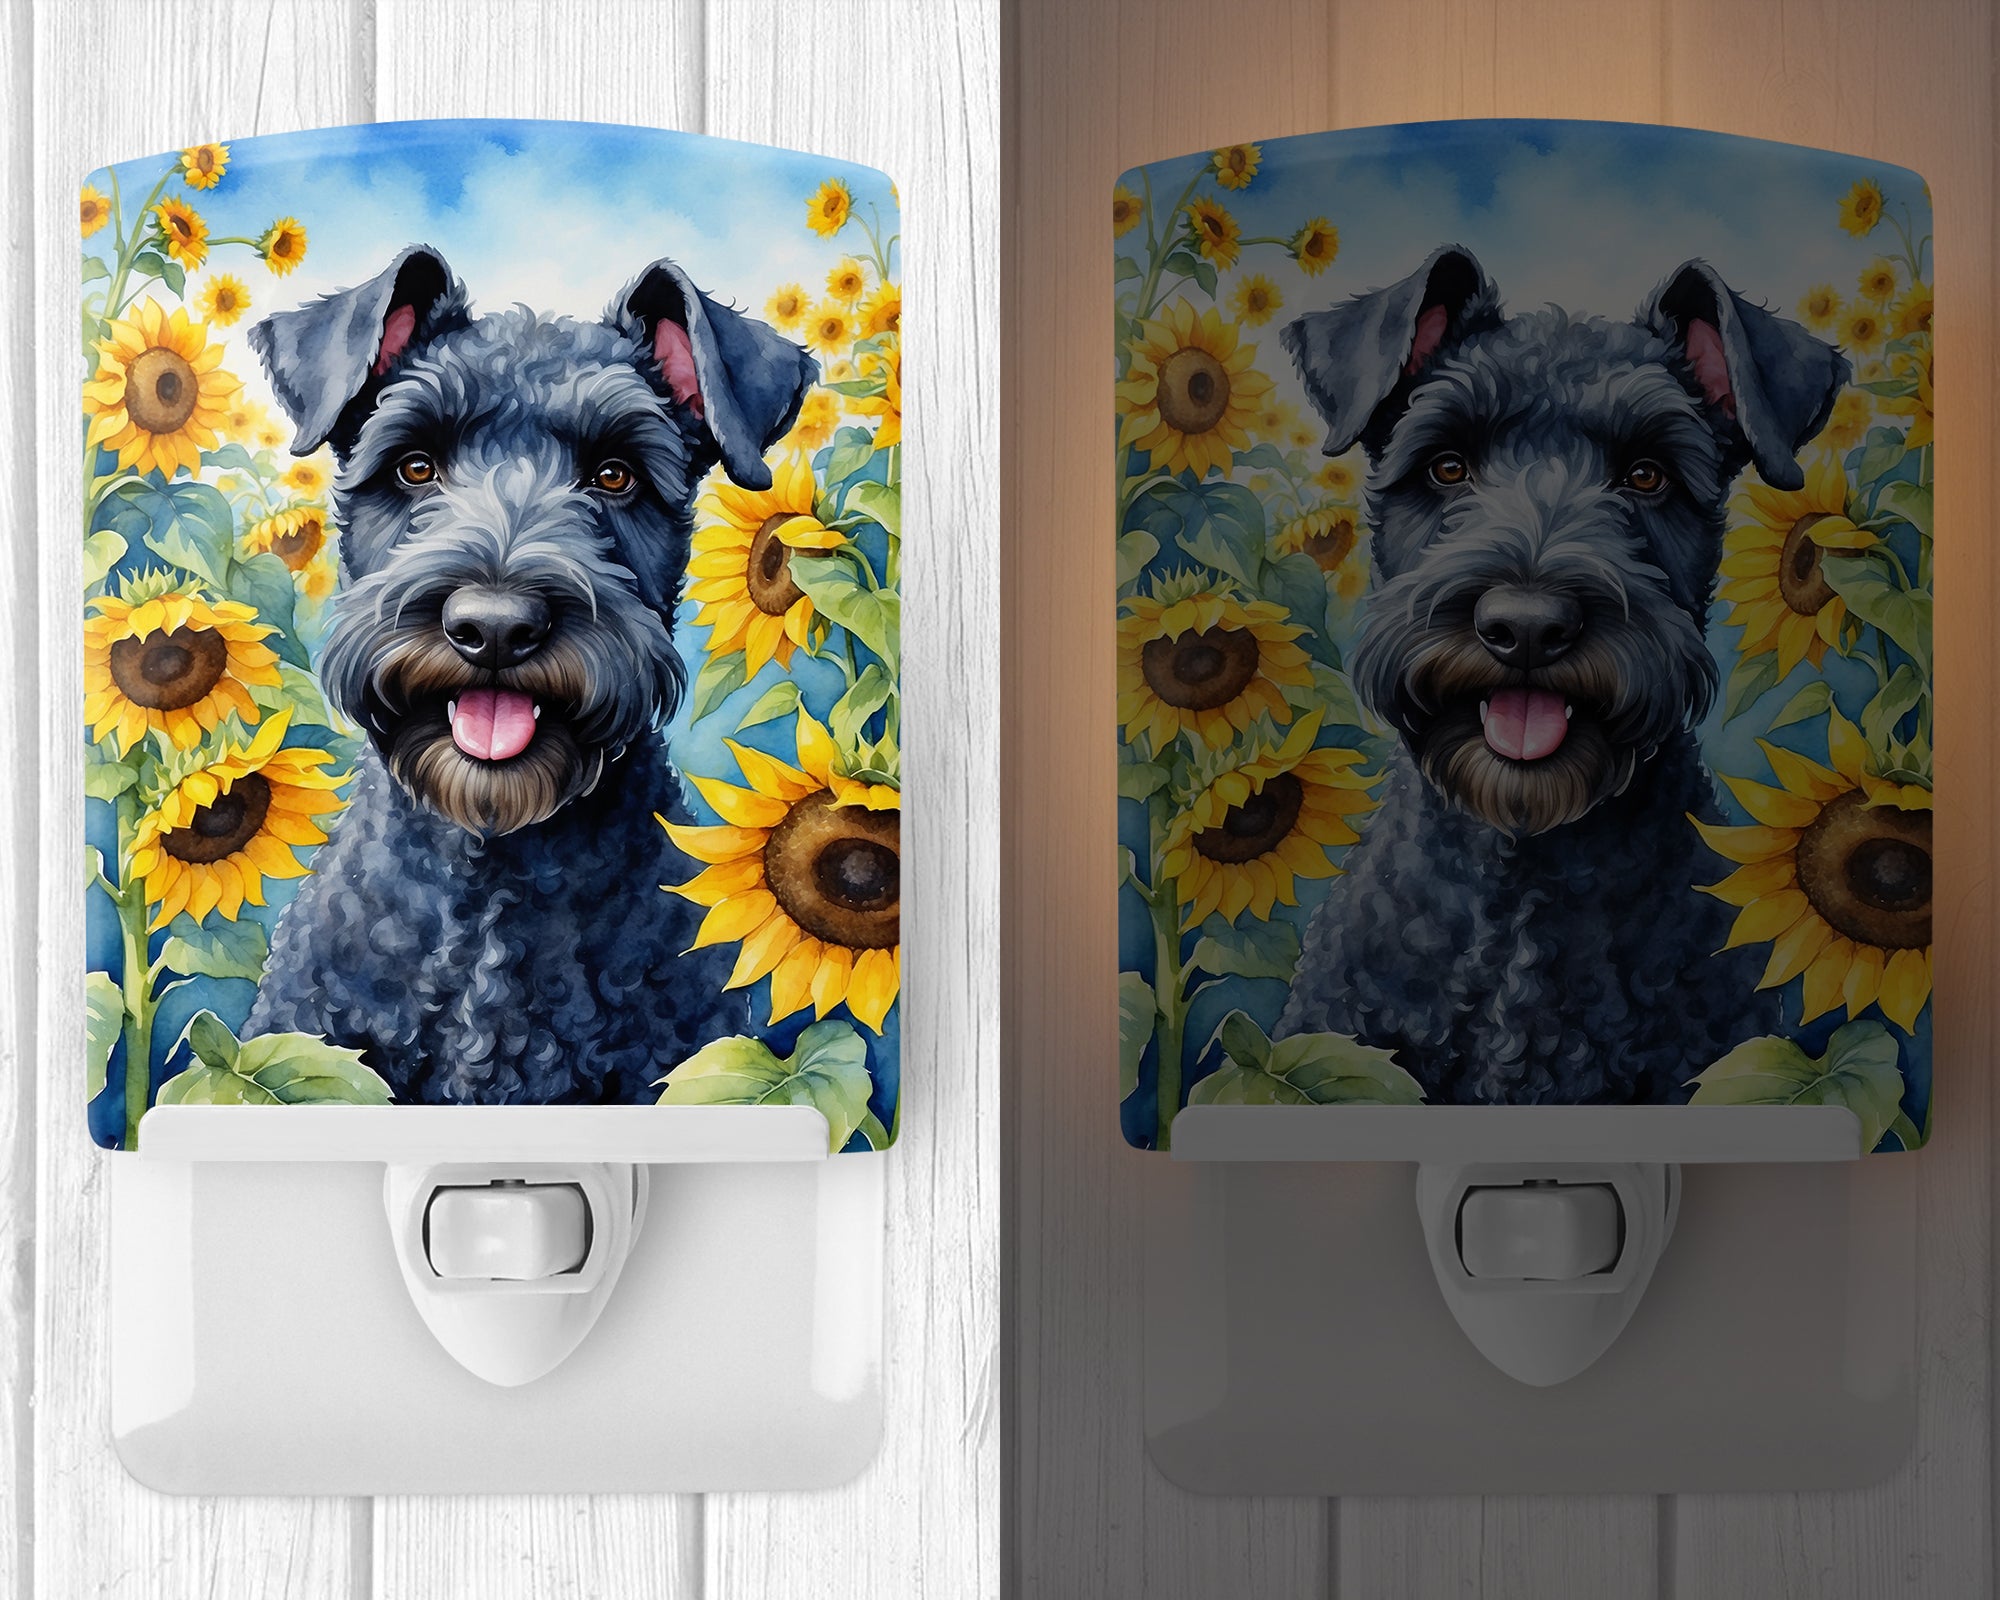 Buy this Kerry Blue Terrier in Sunflowers Ceramic Night Light